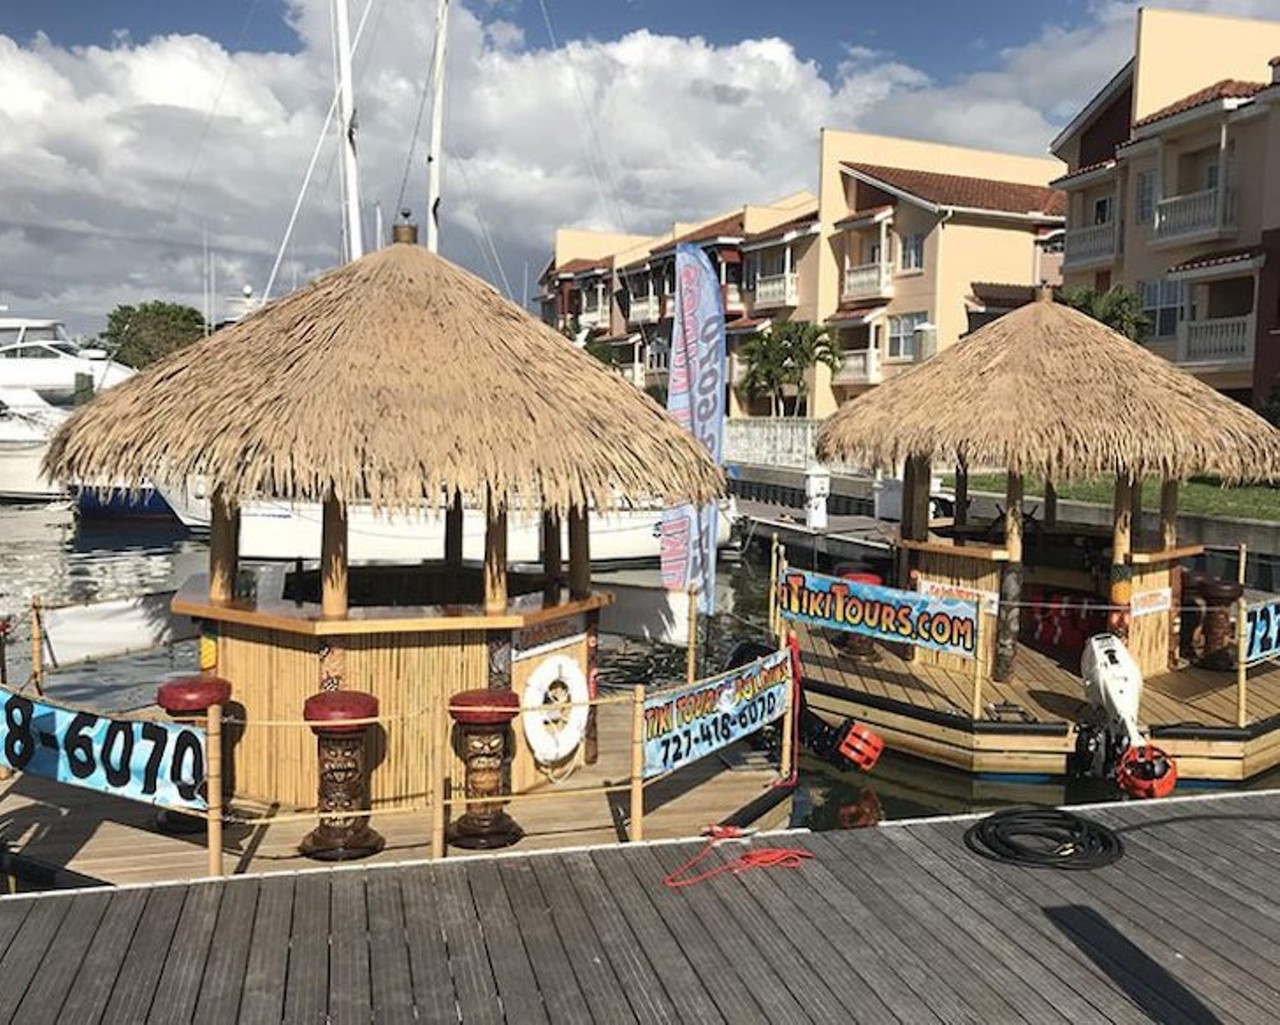 Florida Tiki Tour
727-418-6070 
Florida Tiki Tour takes you and five friends on a ride through Johns Pass and Boca Ciega Bay area atop a huge, floating Hawaiian-style tiki hut. Make sure to grab a cooler and your favorite drinks before hopping aboard. 
Photo via floridatikitours.com